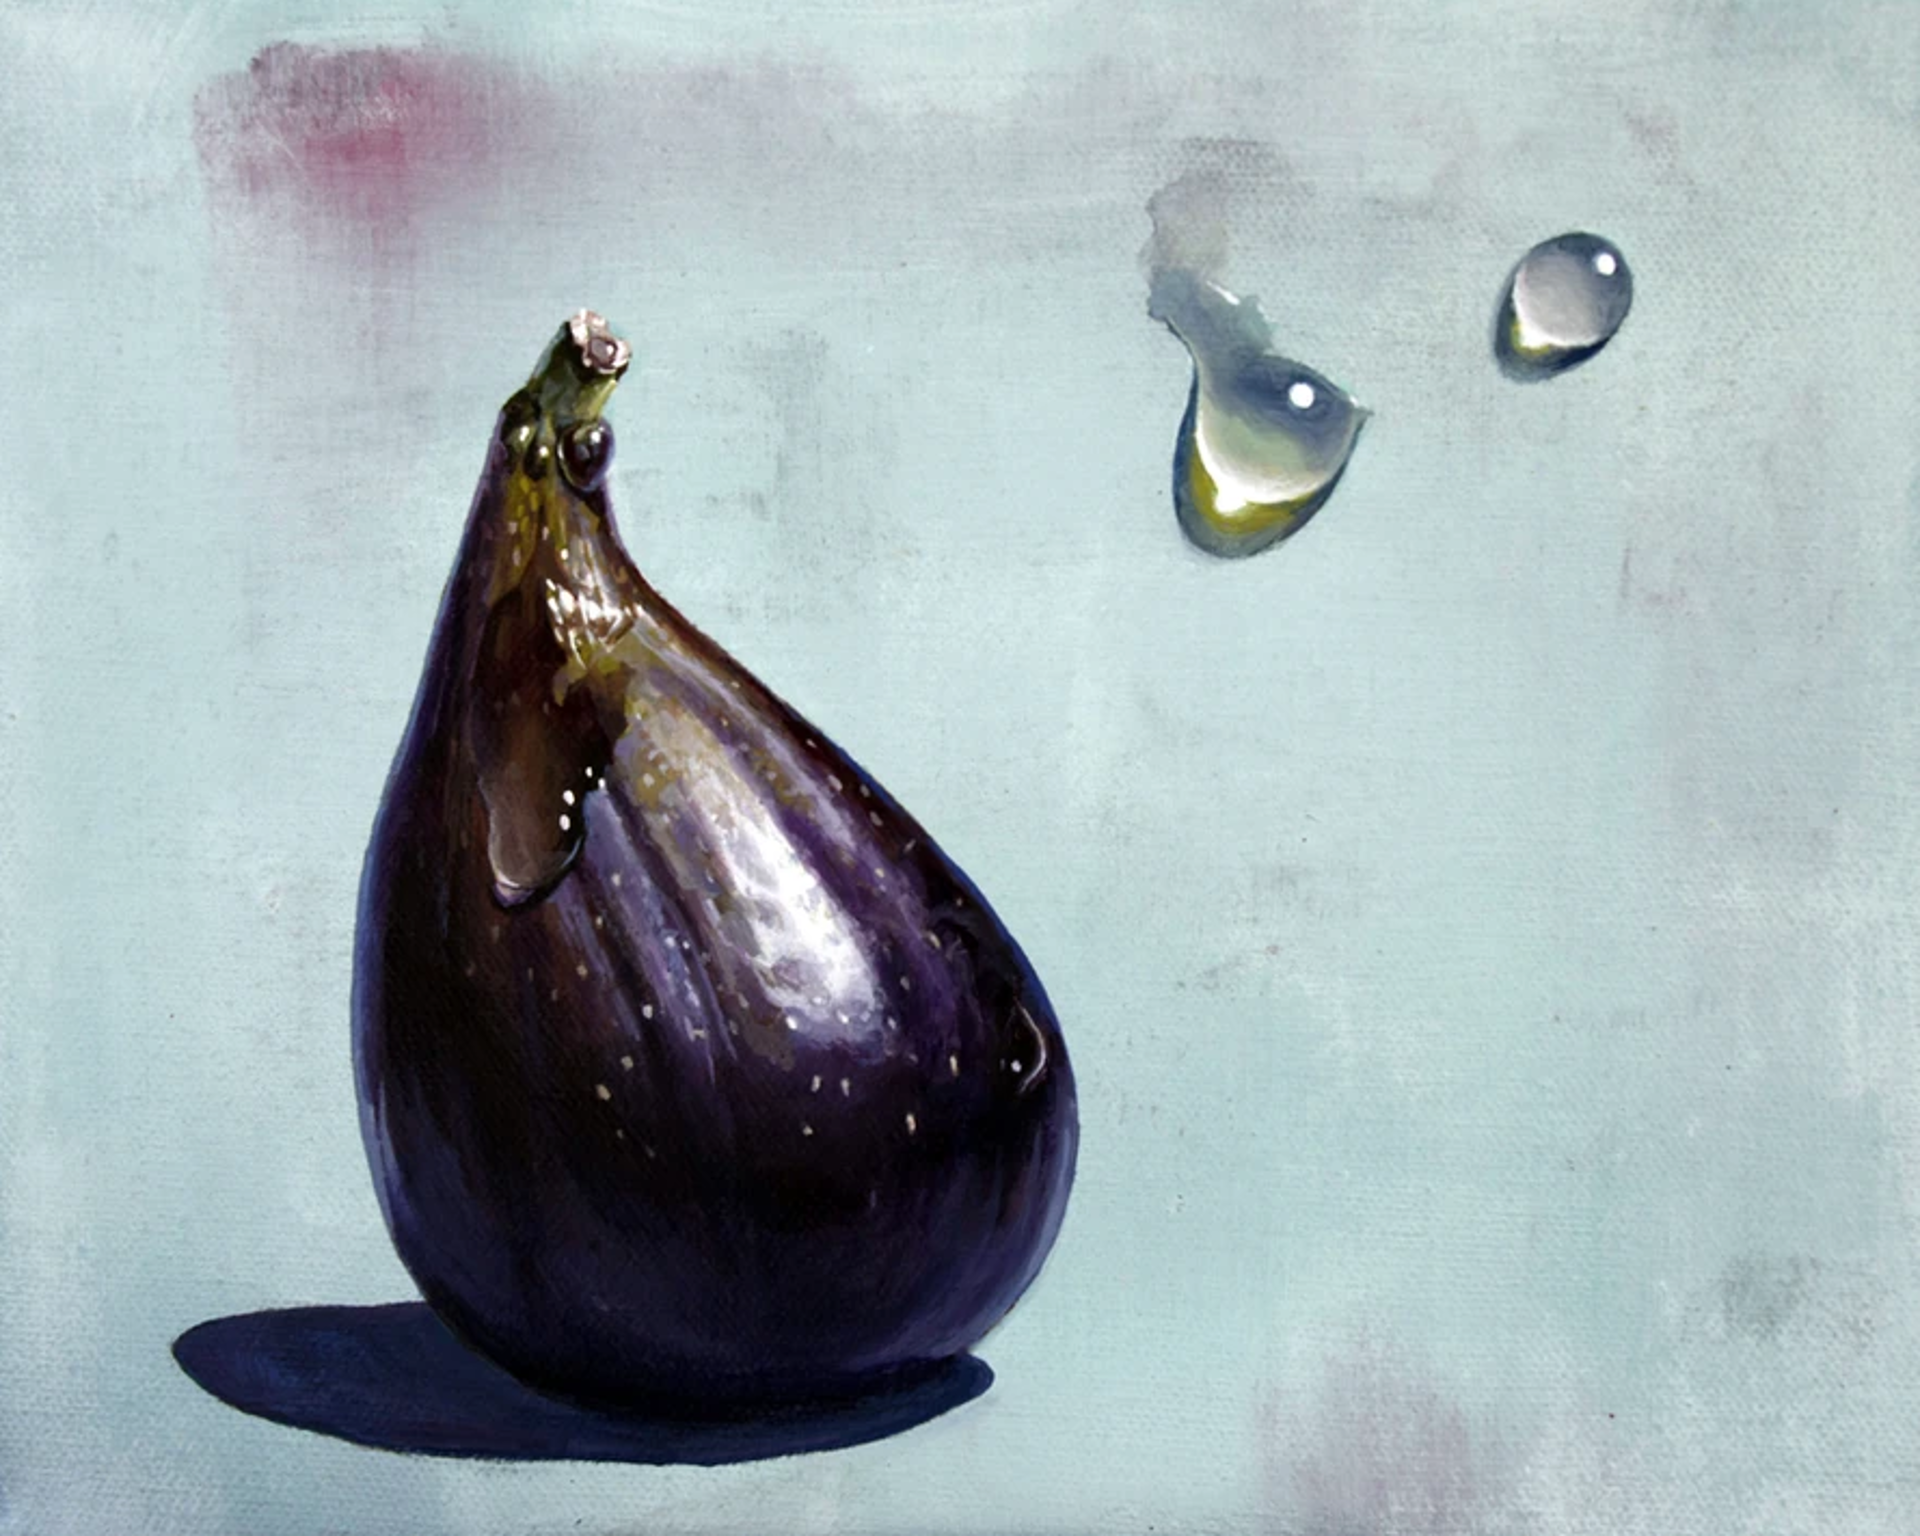 Light of Life - A Fig and Water Drops 22 by Paul Art Lee